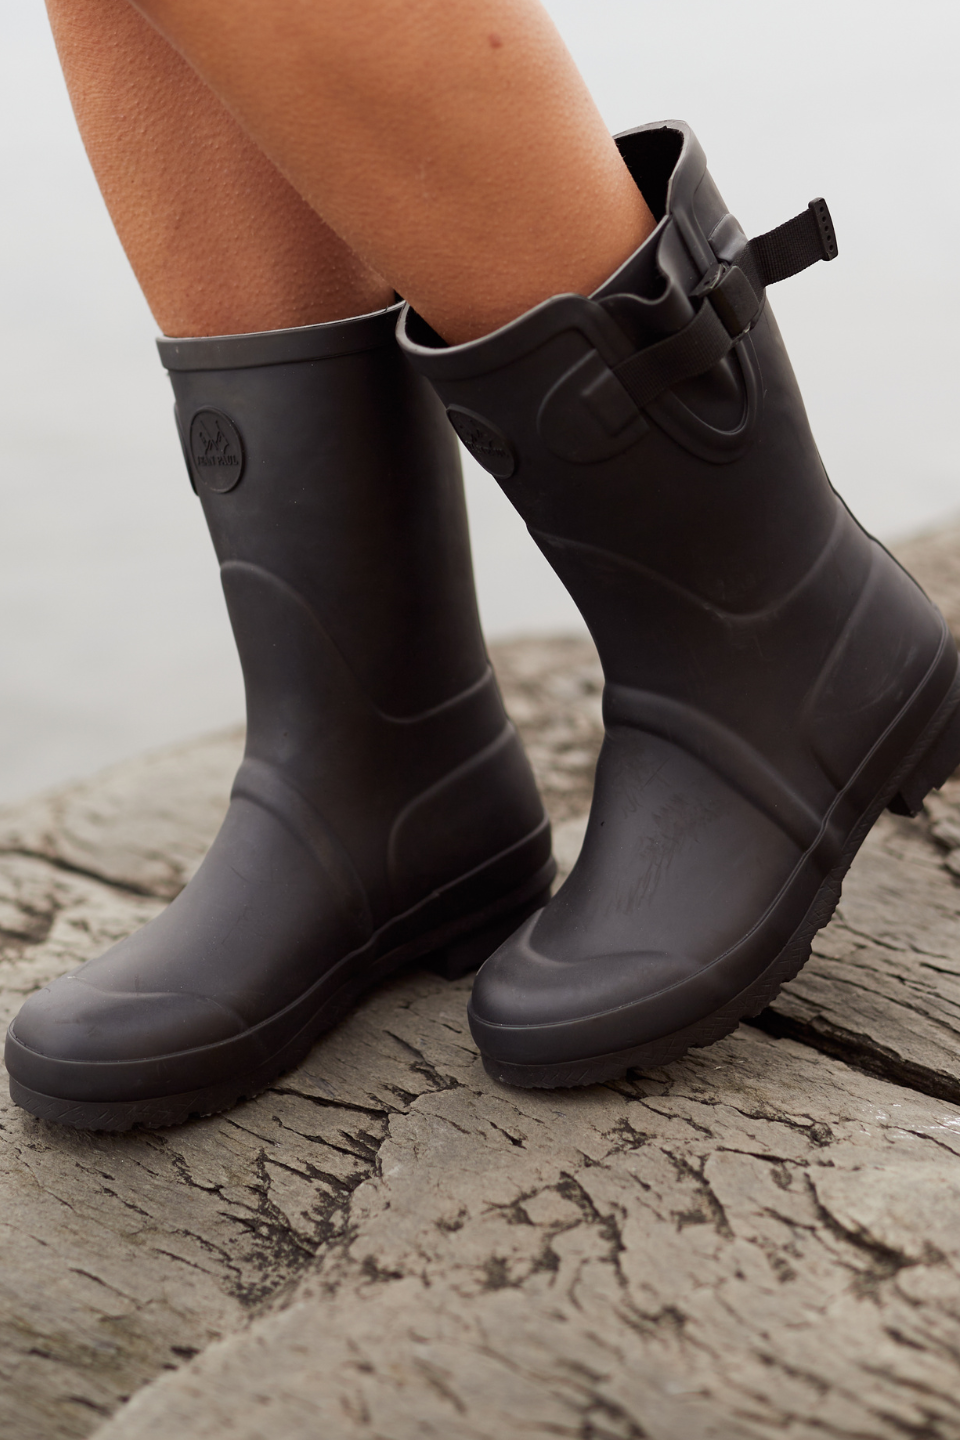 The Terre rainboot is back!